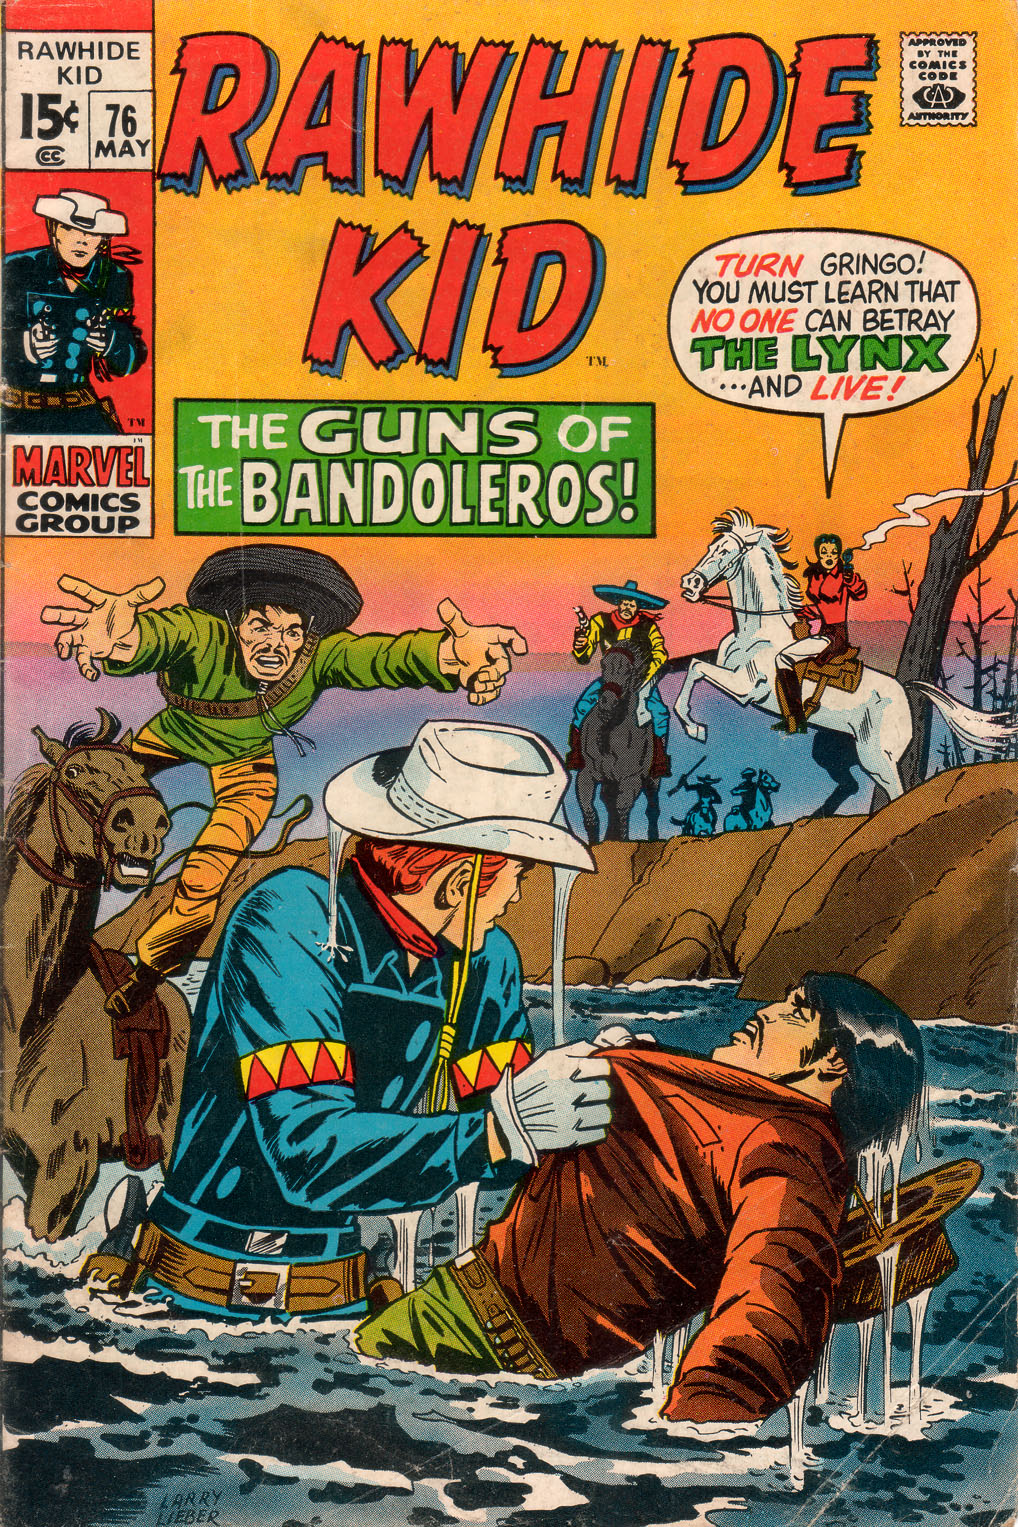 Read online The Rawhide Kid comic -  Issue #76 - 1